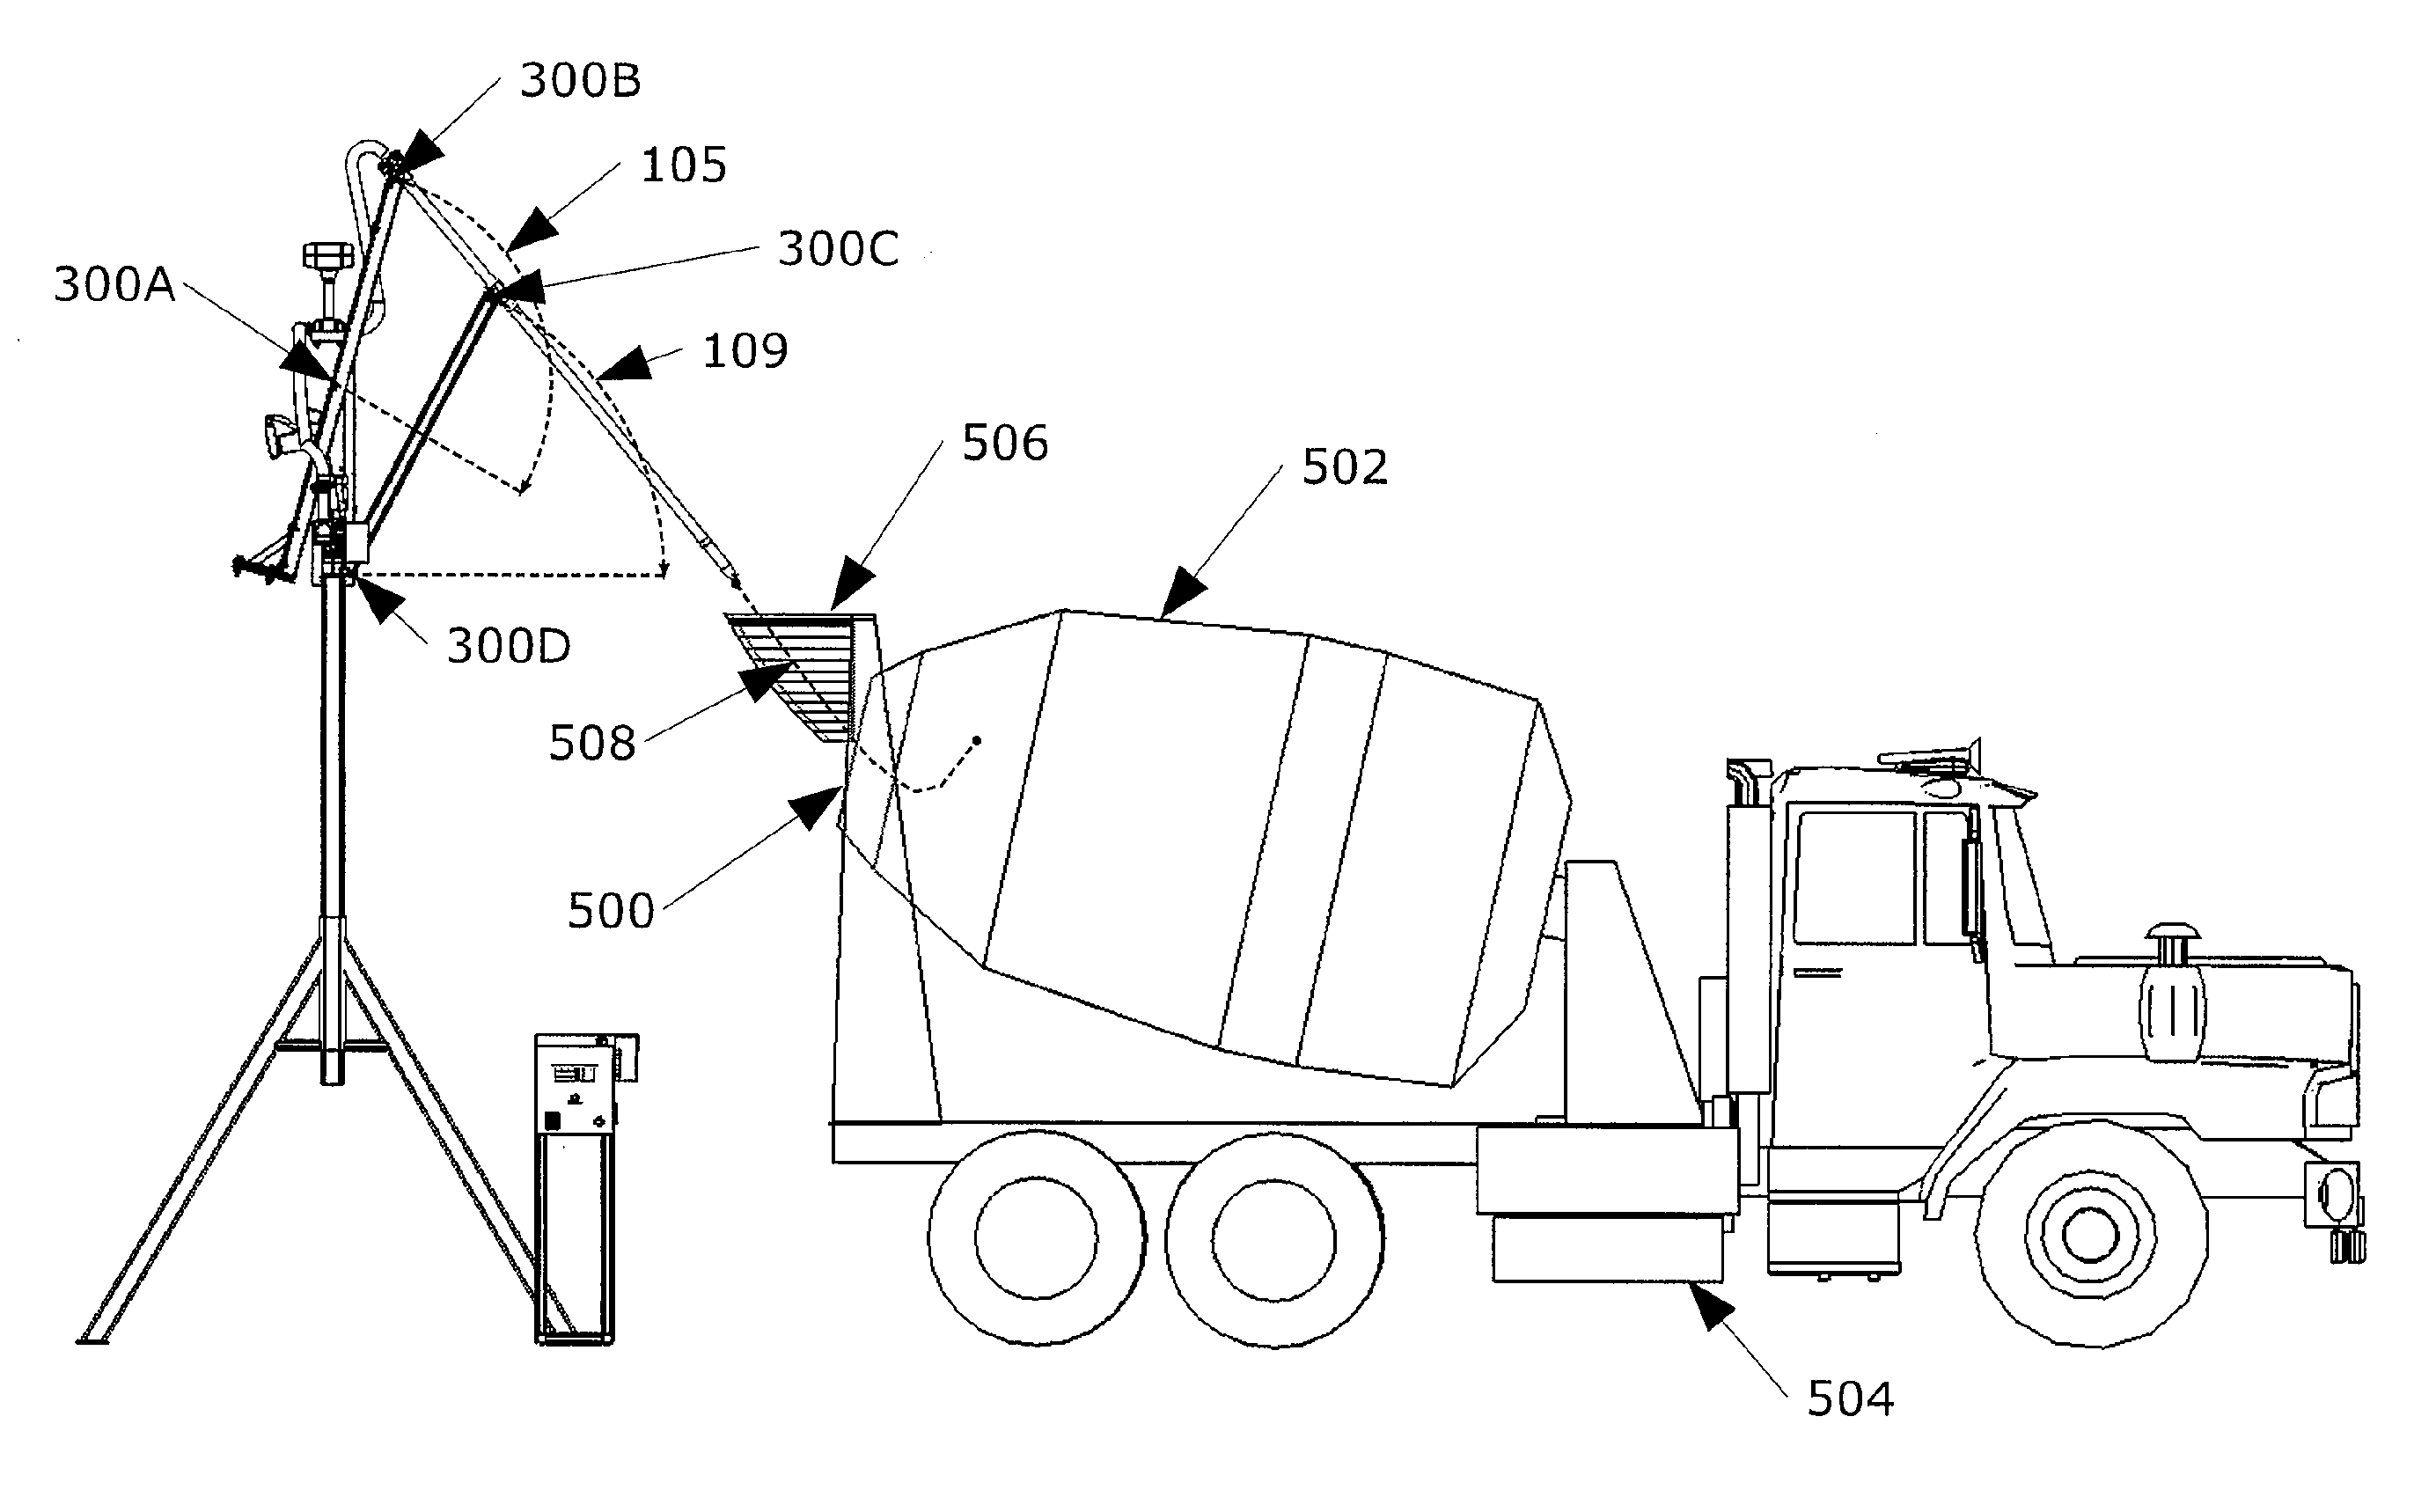 System and Process for Introducing a Rigid Lance into a Concrete Mixing Truck Using an Articulated Arm